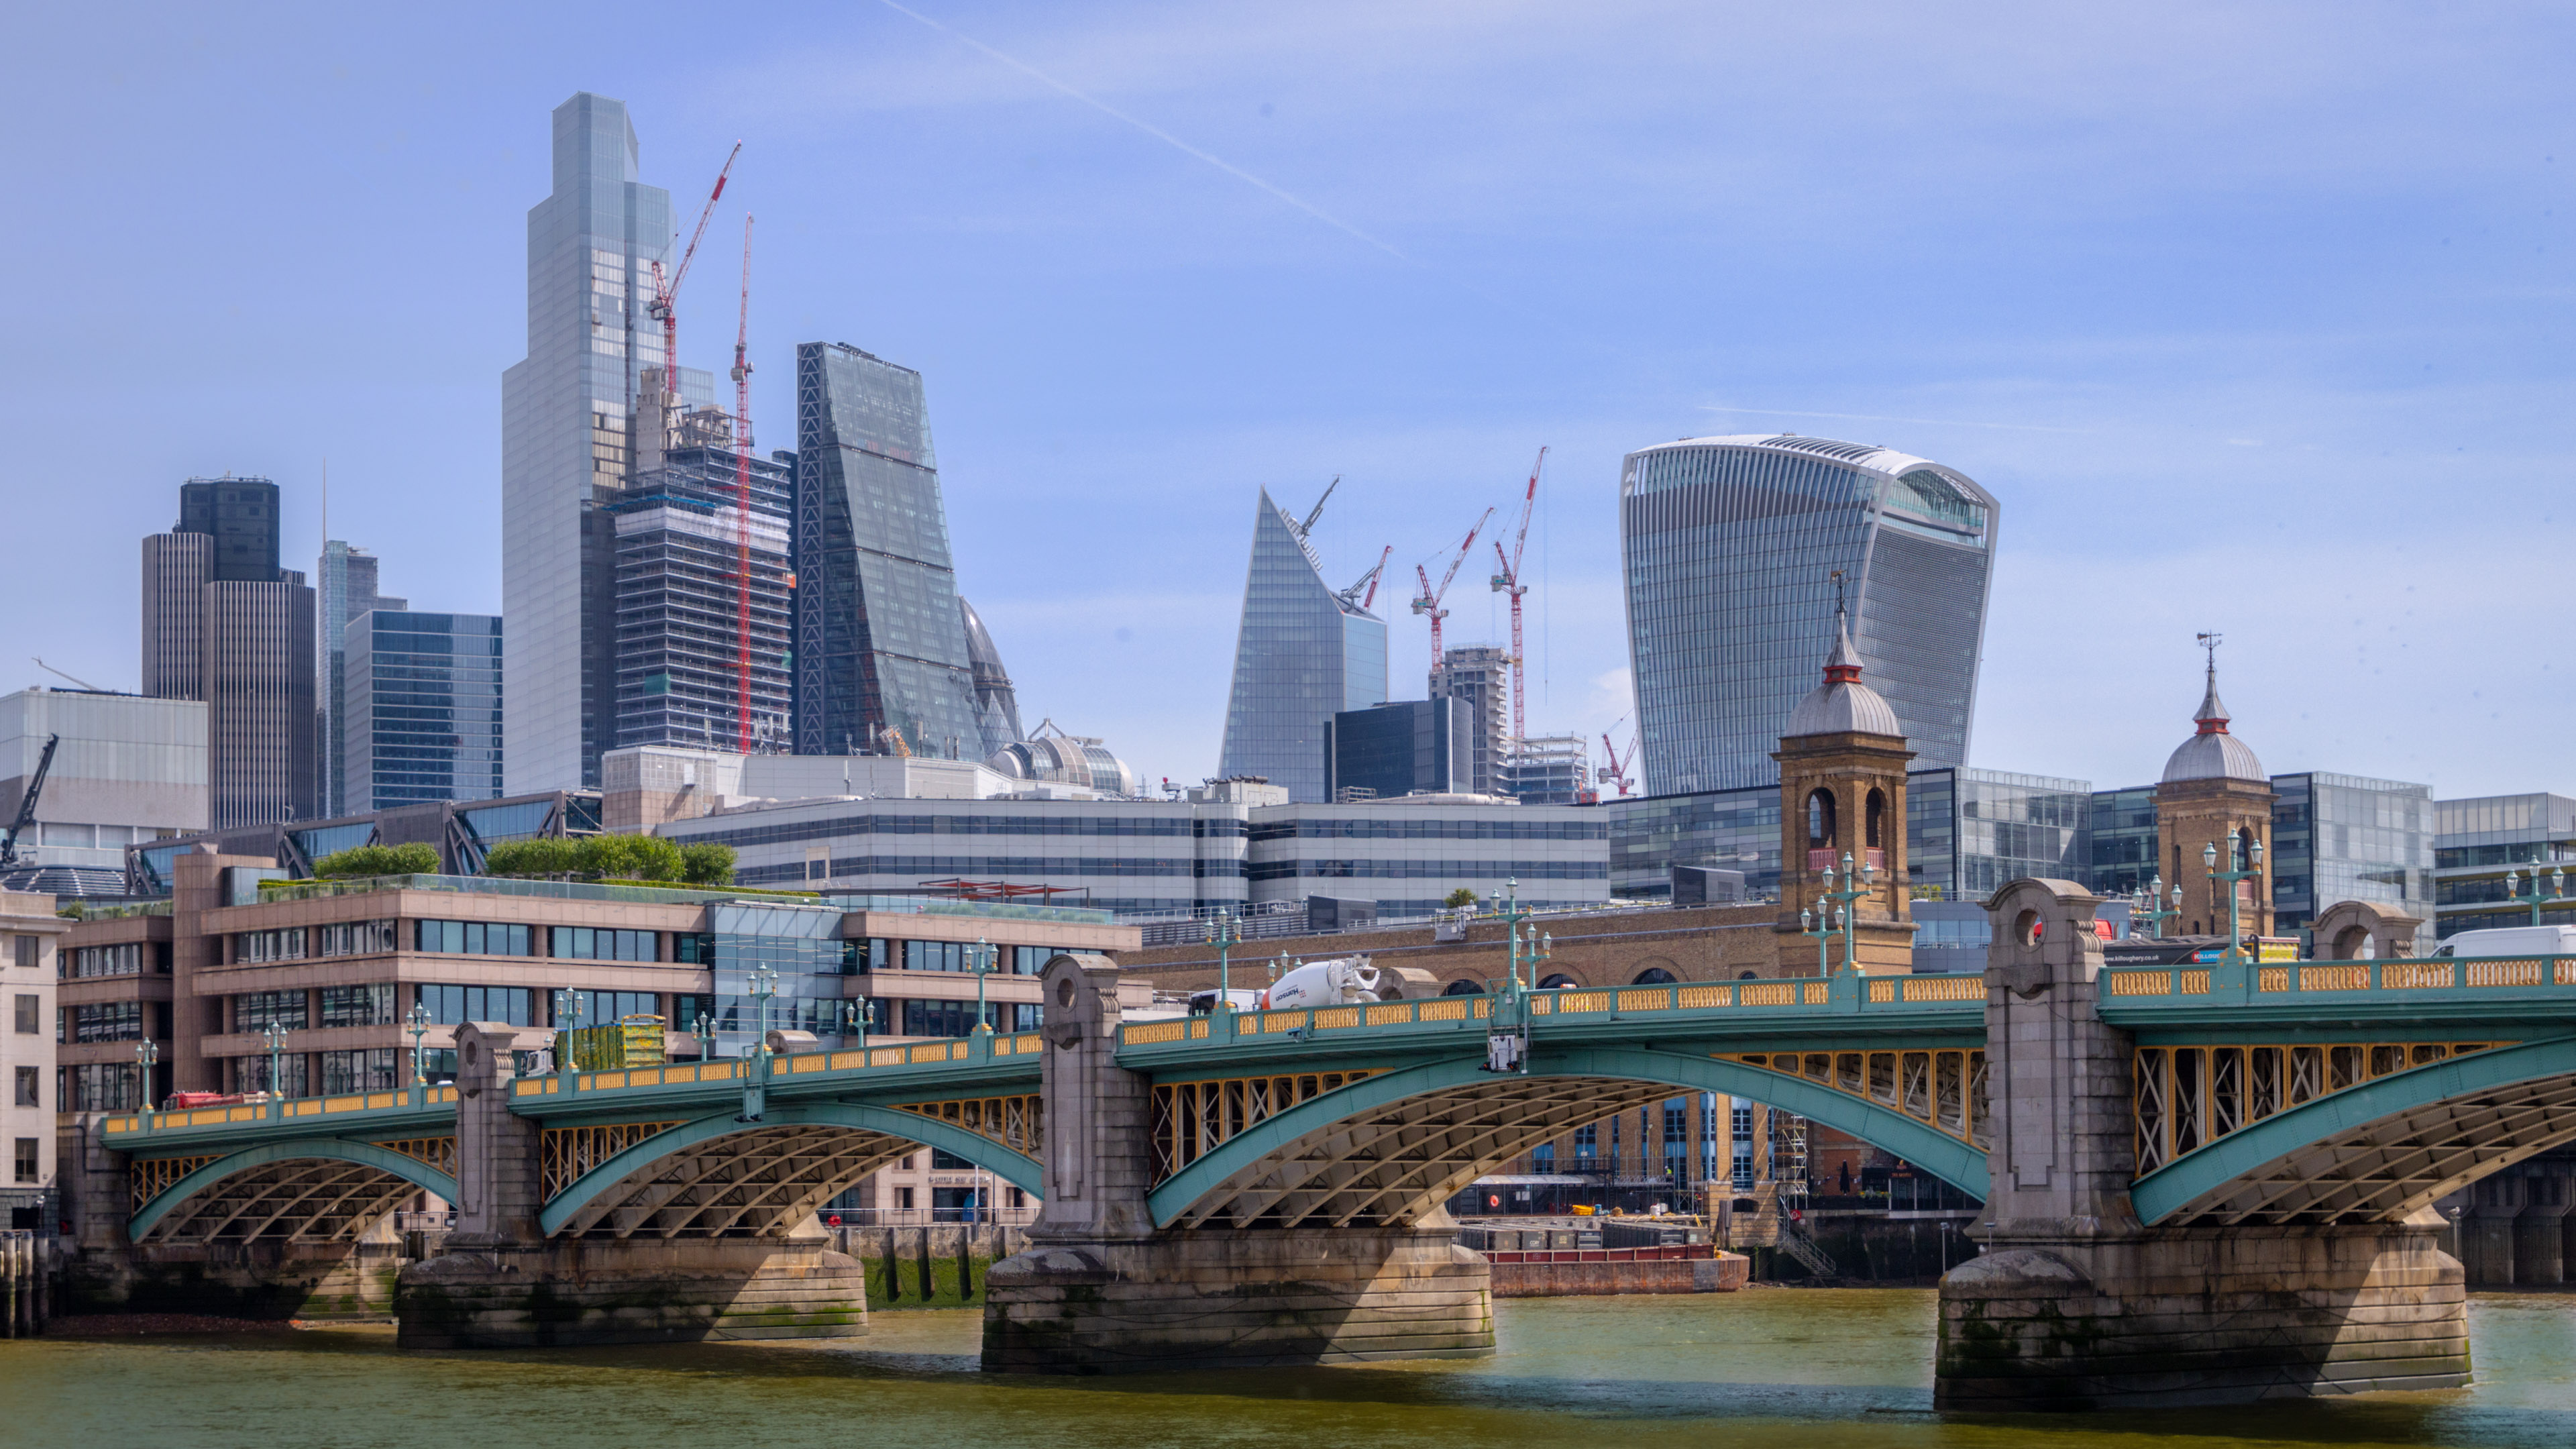 Capture the beauty of London's architecture with this cityscape wallpaper